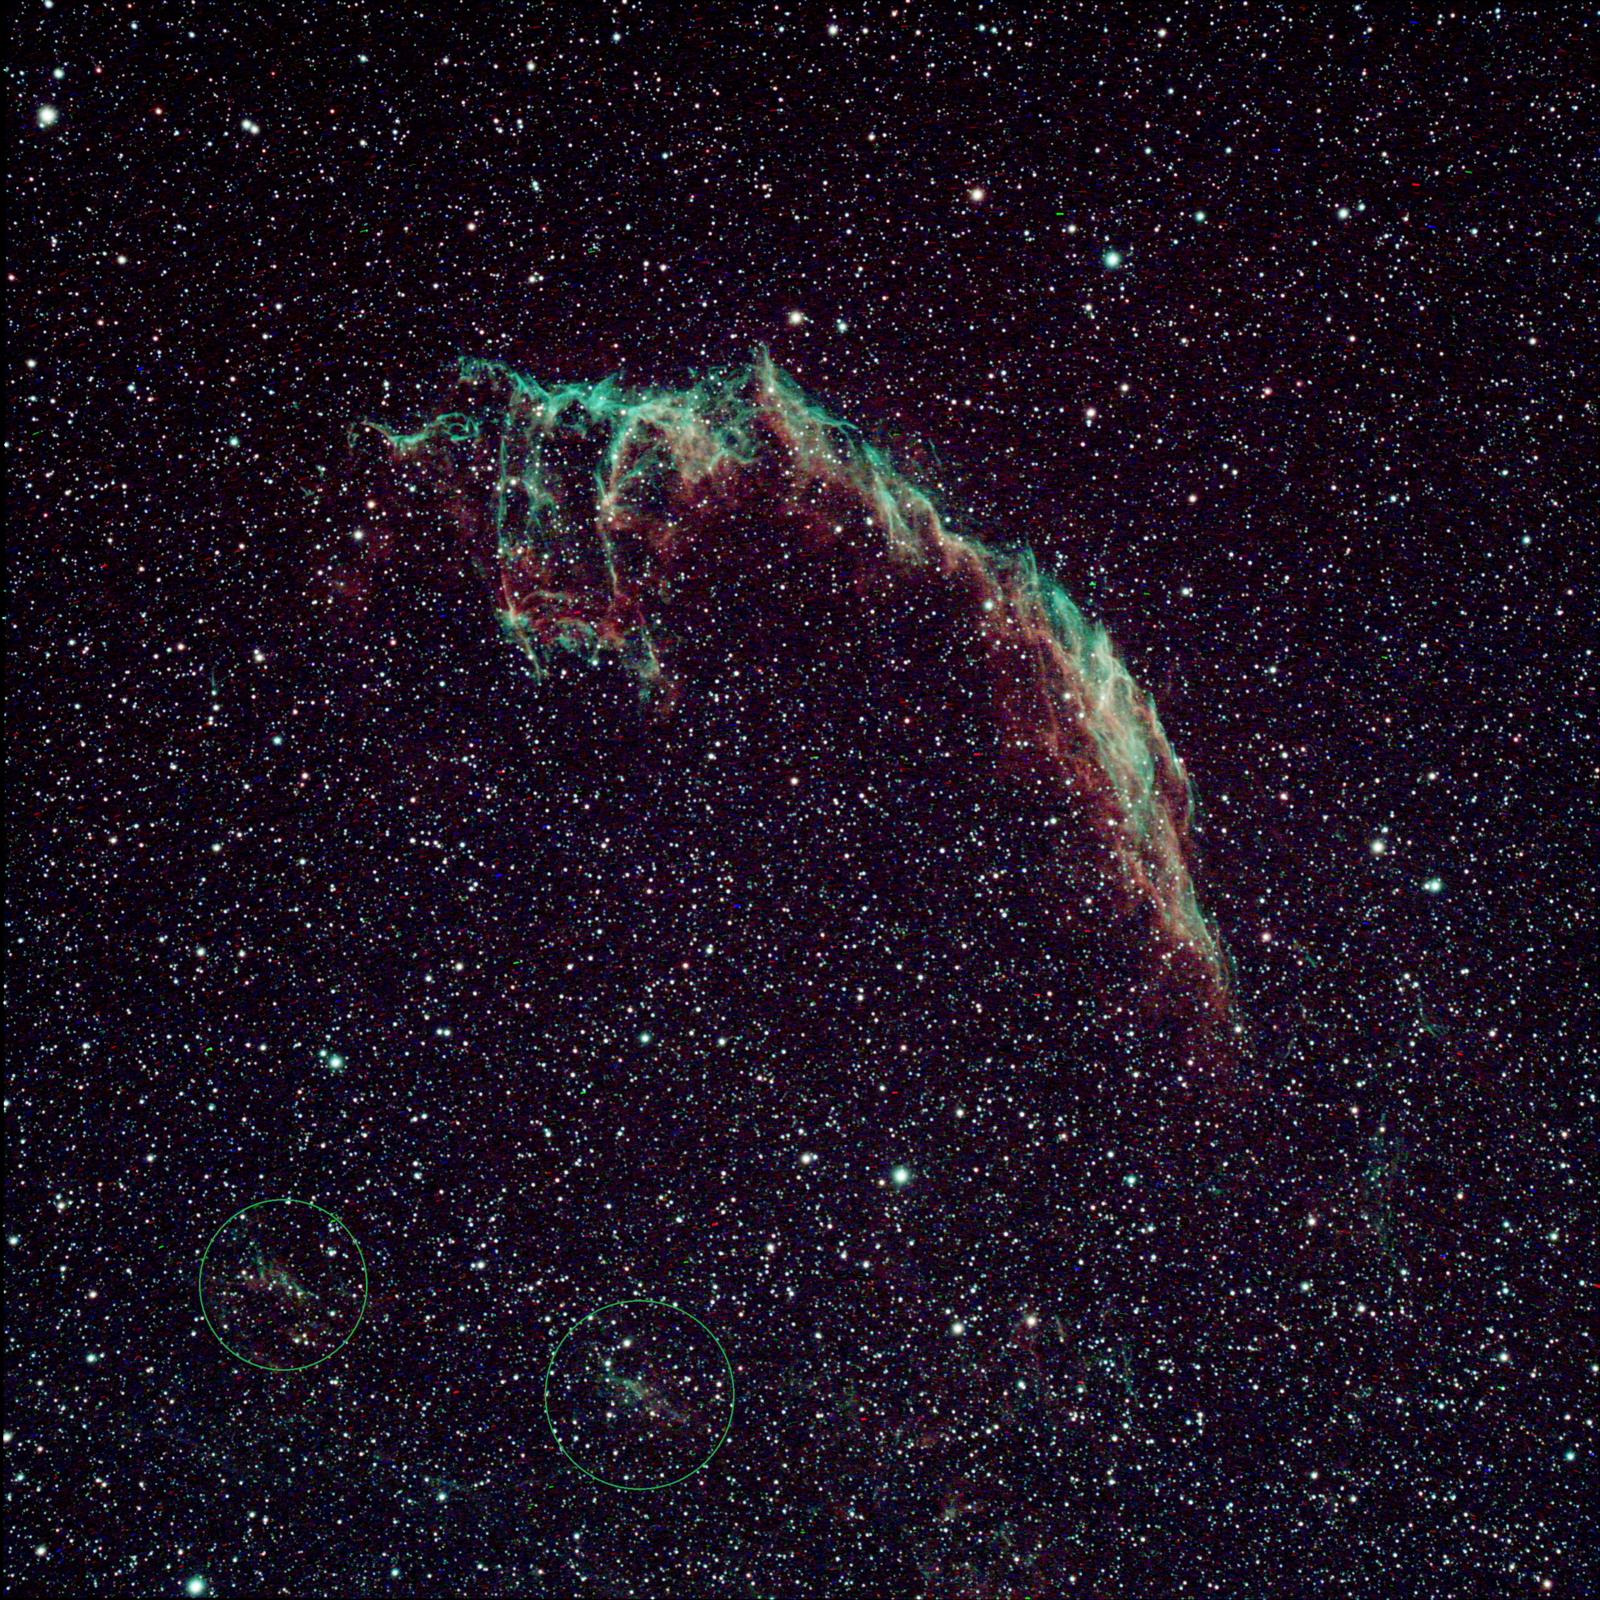 Two patches of nebulae near the Eastern Veil